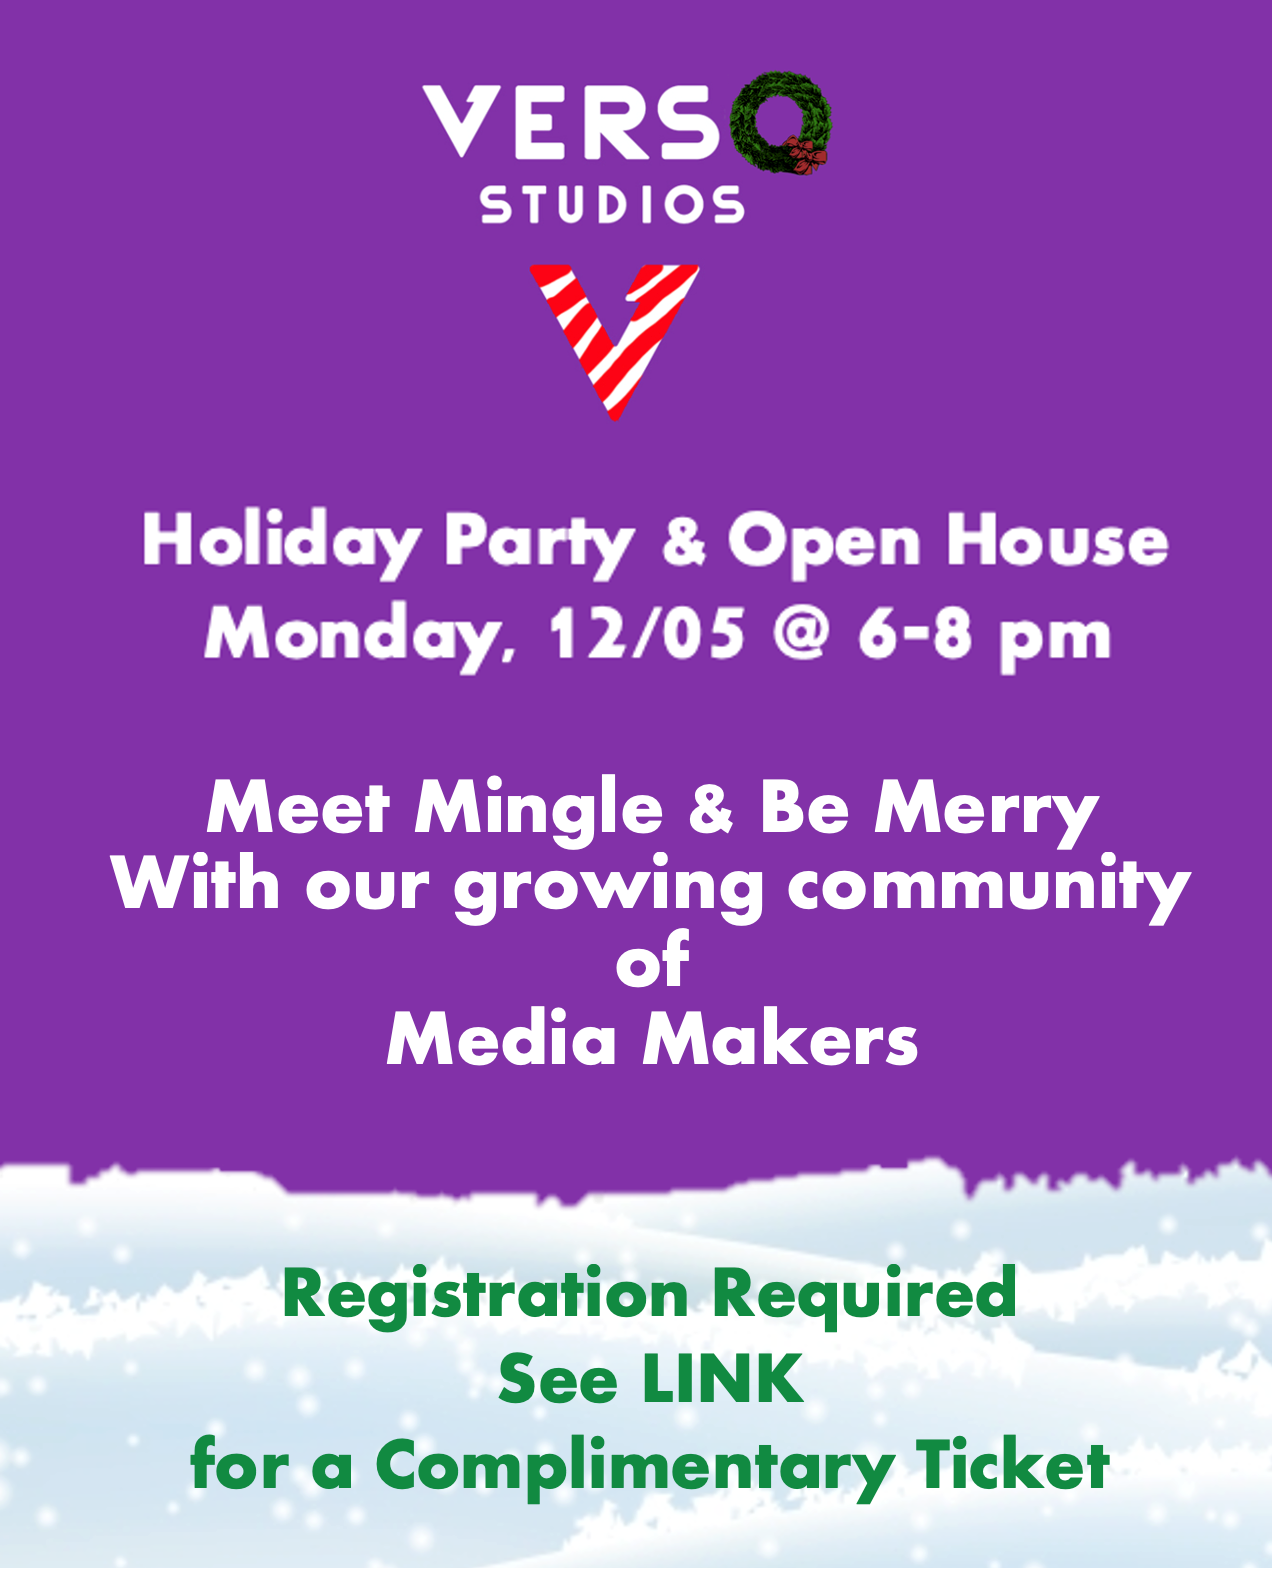 Graphic: Verso Studios Holiday Party and Open House